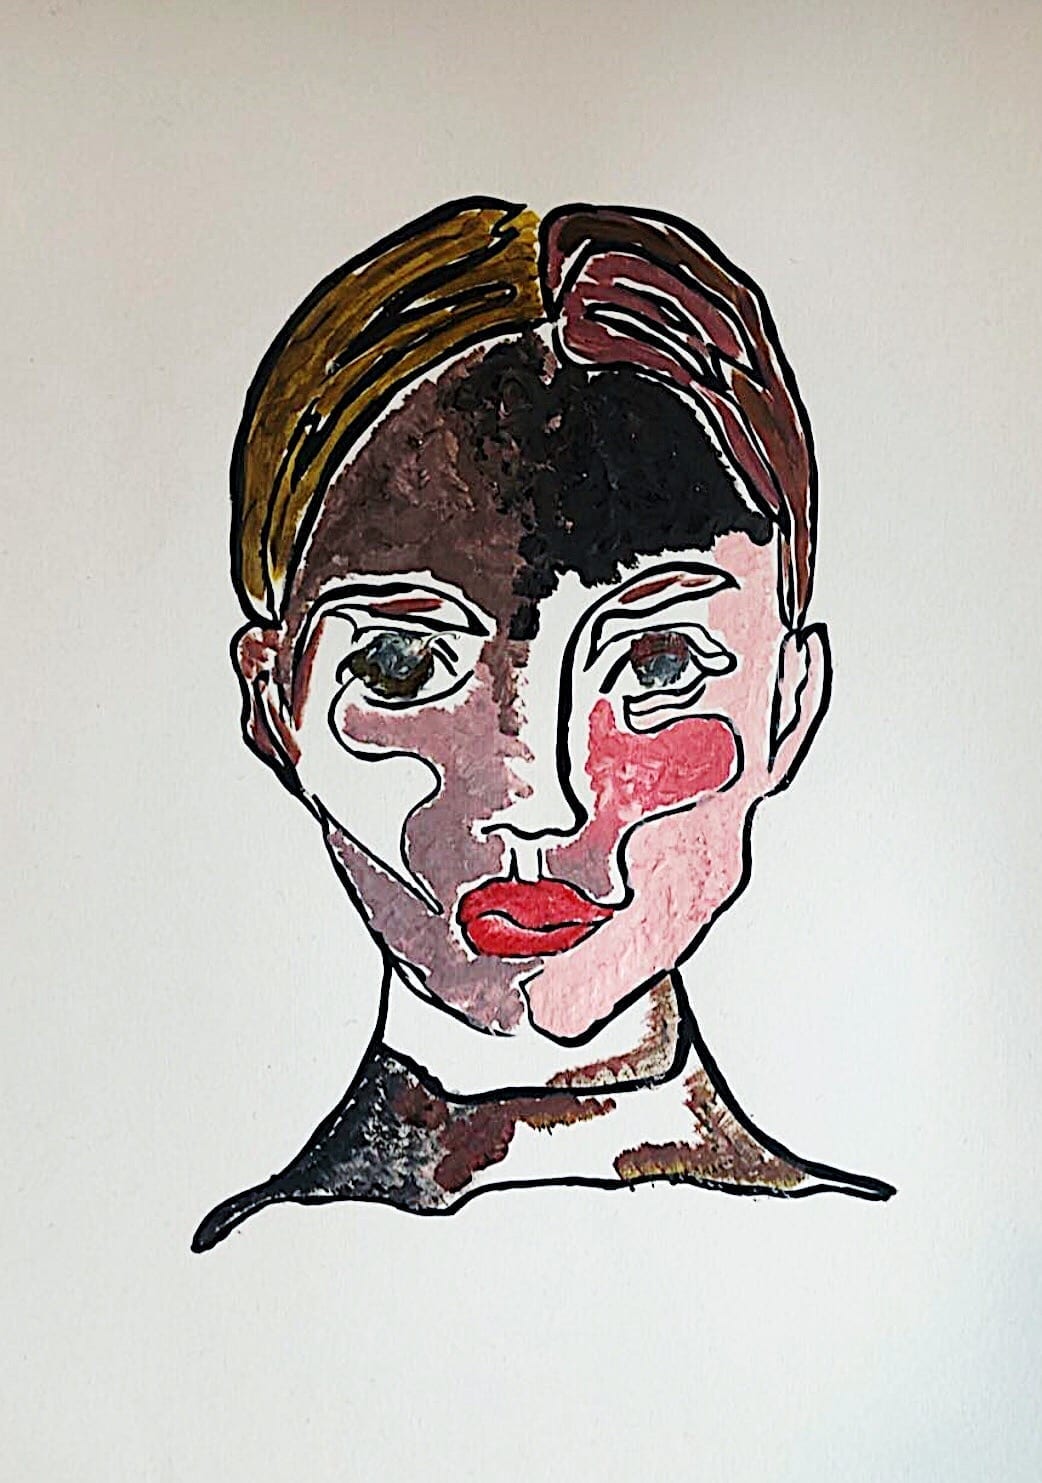 Illustration of a woman's face divided into different colors